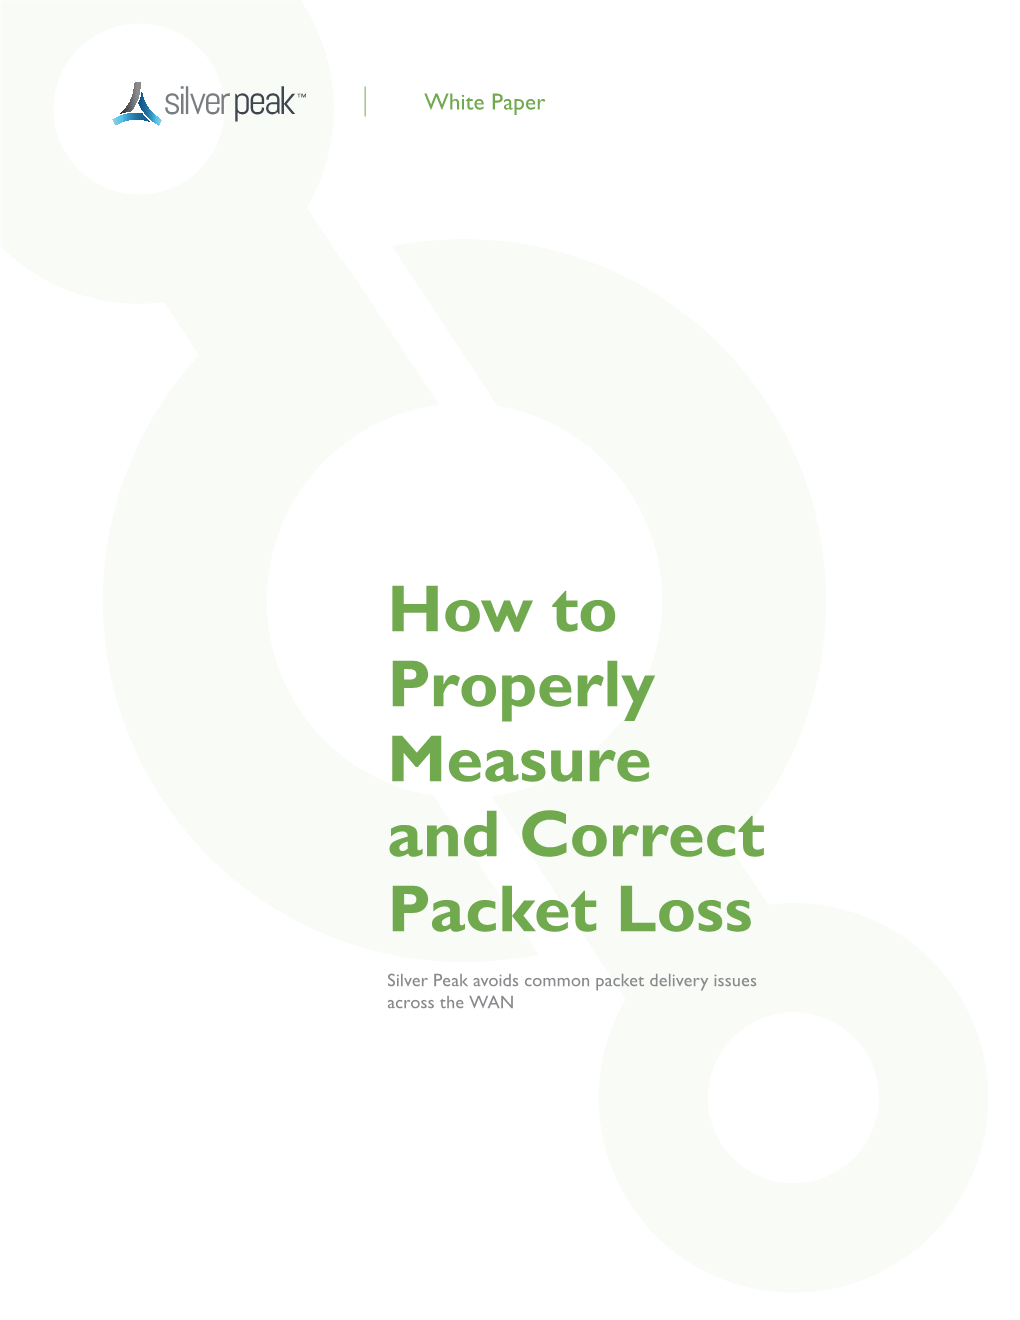 How to Properly Measure and Correct Packet Loss